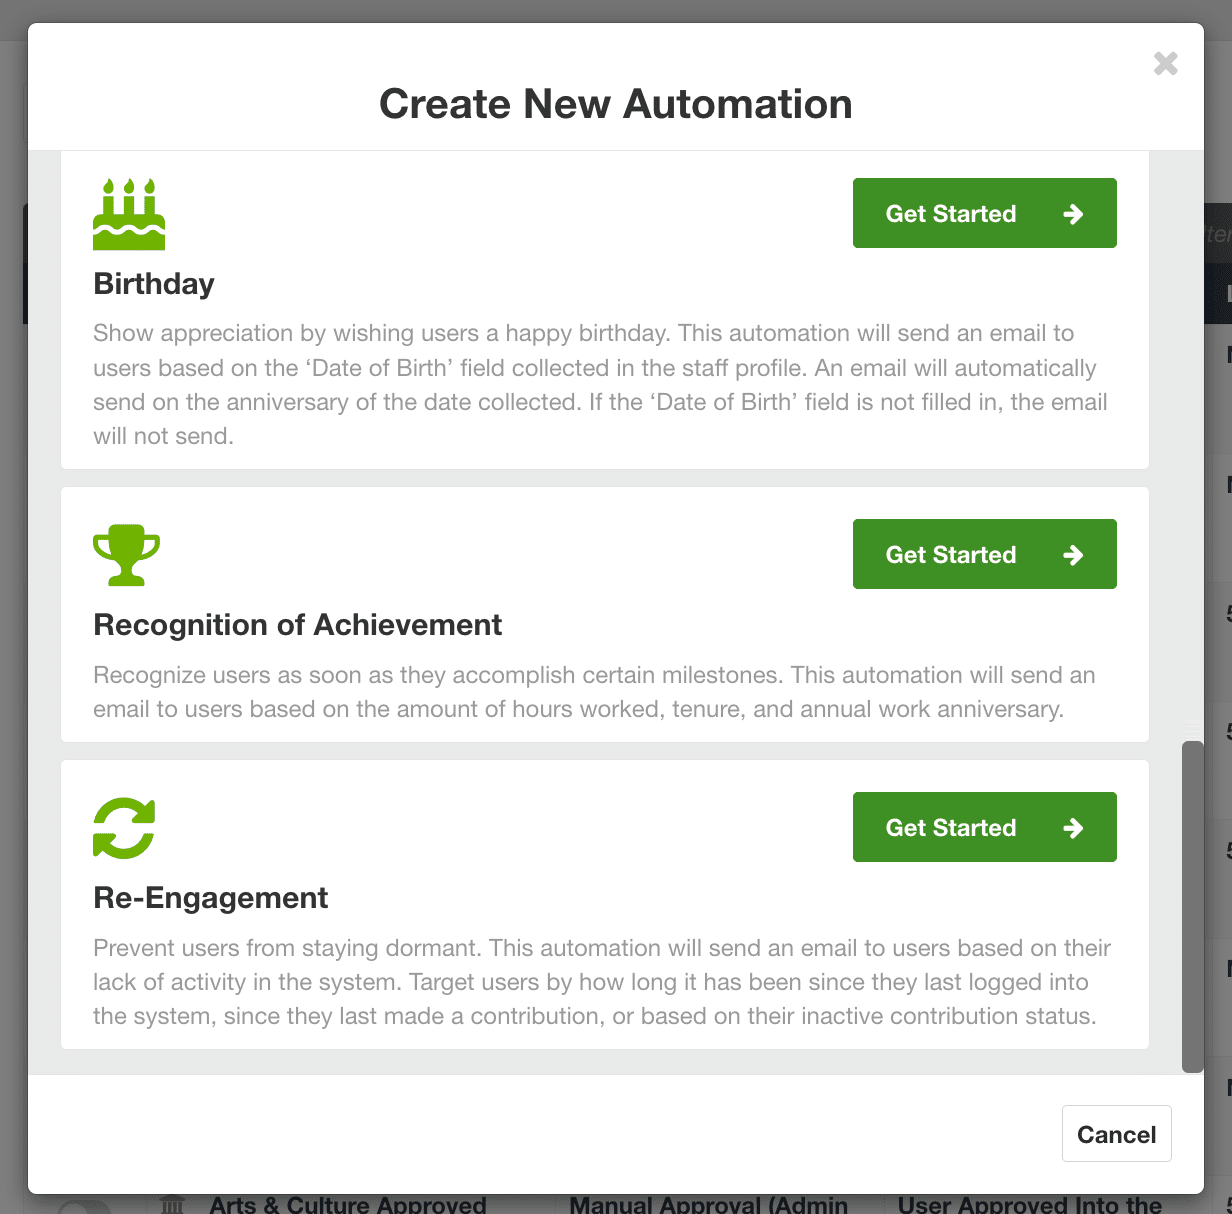 Create a new volunteer engagement automation